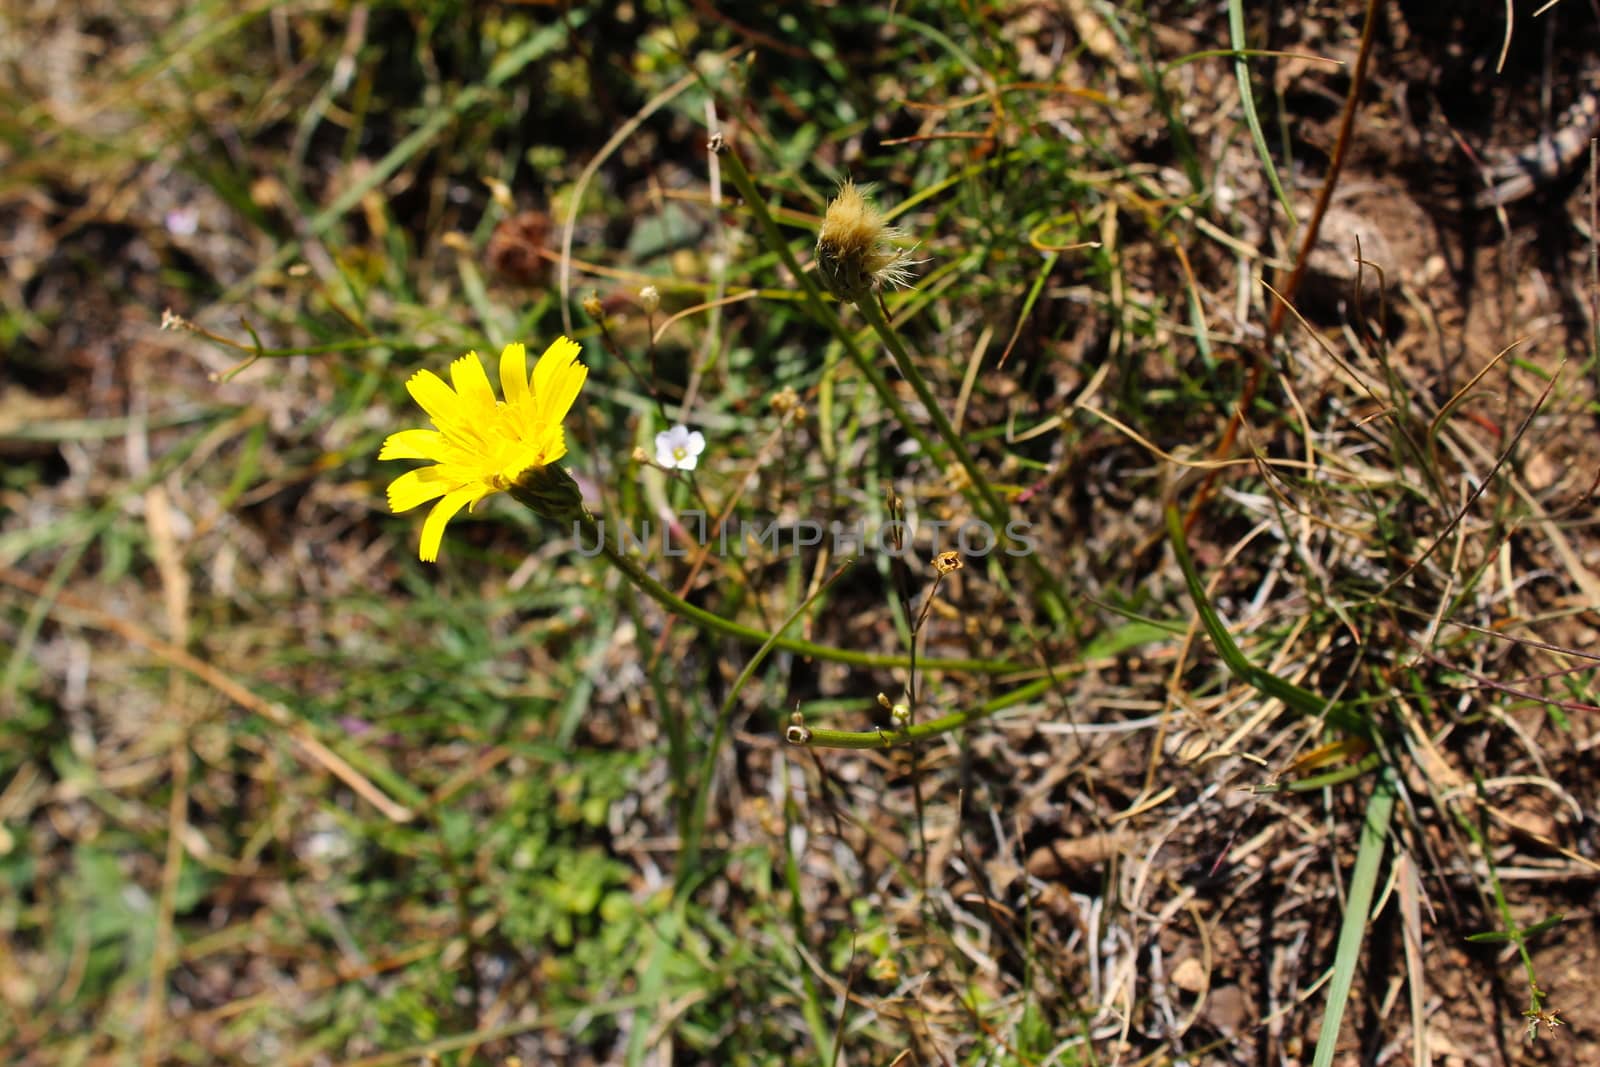 Yellow flower in the grass in autumn. Bjelasnica Mountain, Bosnia and Herzegovina.